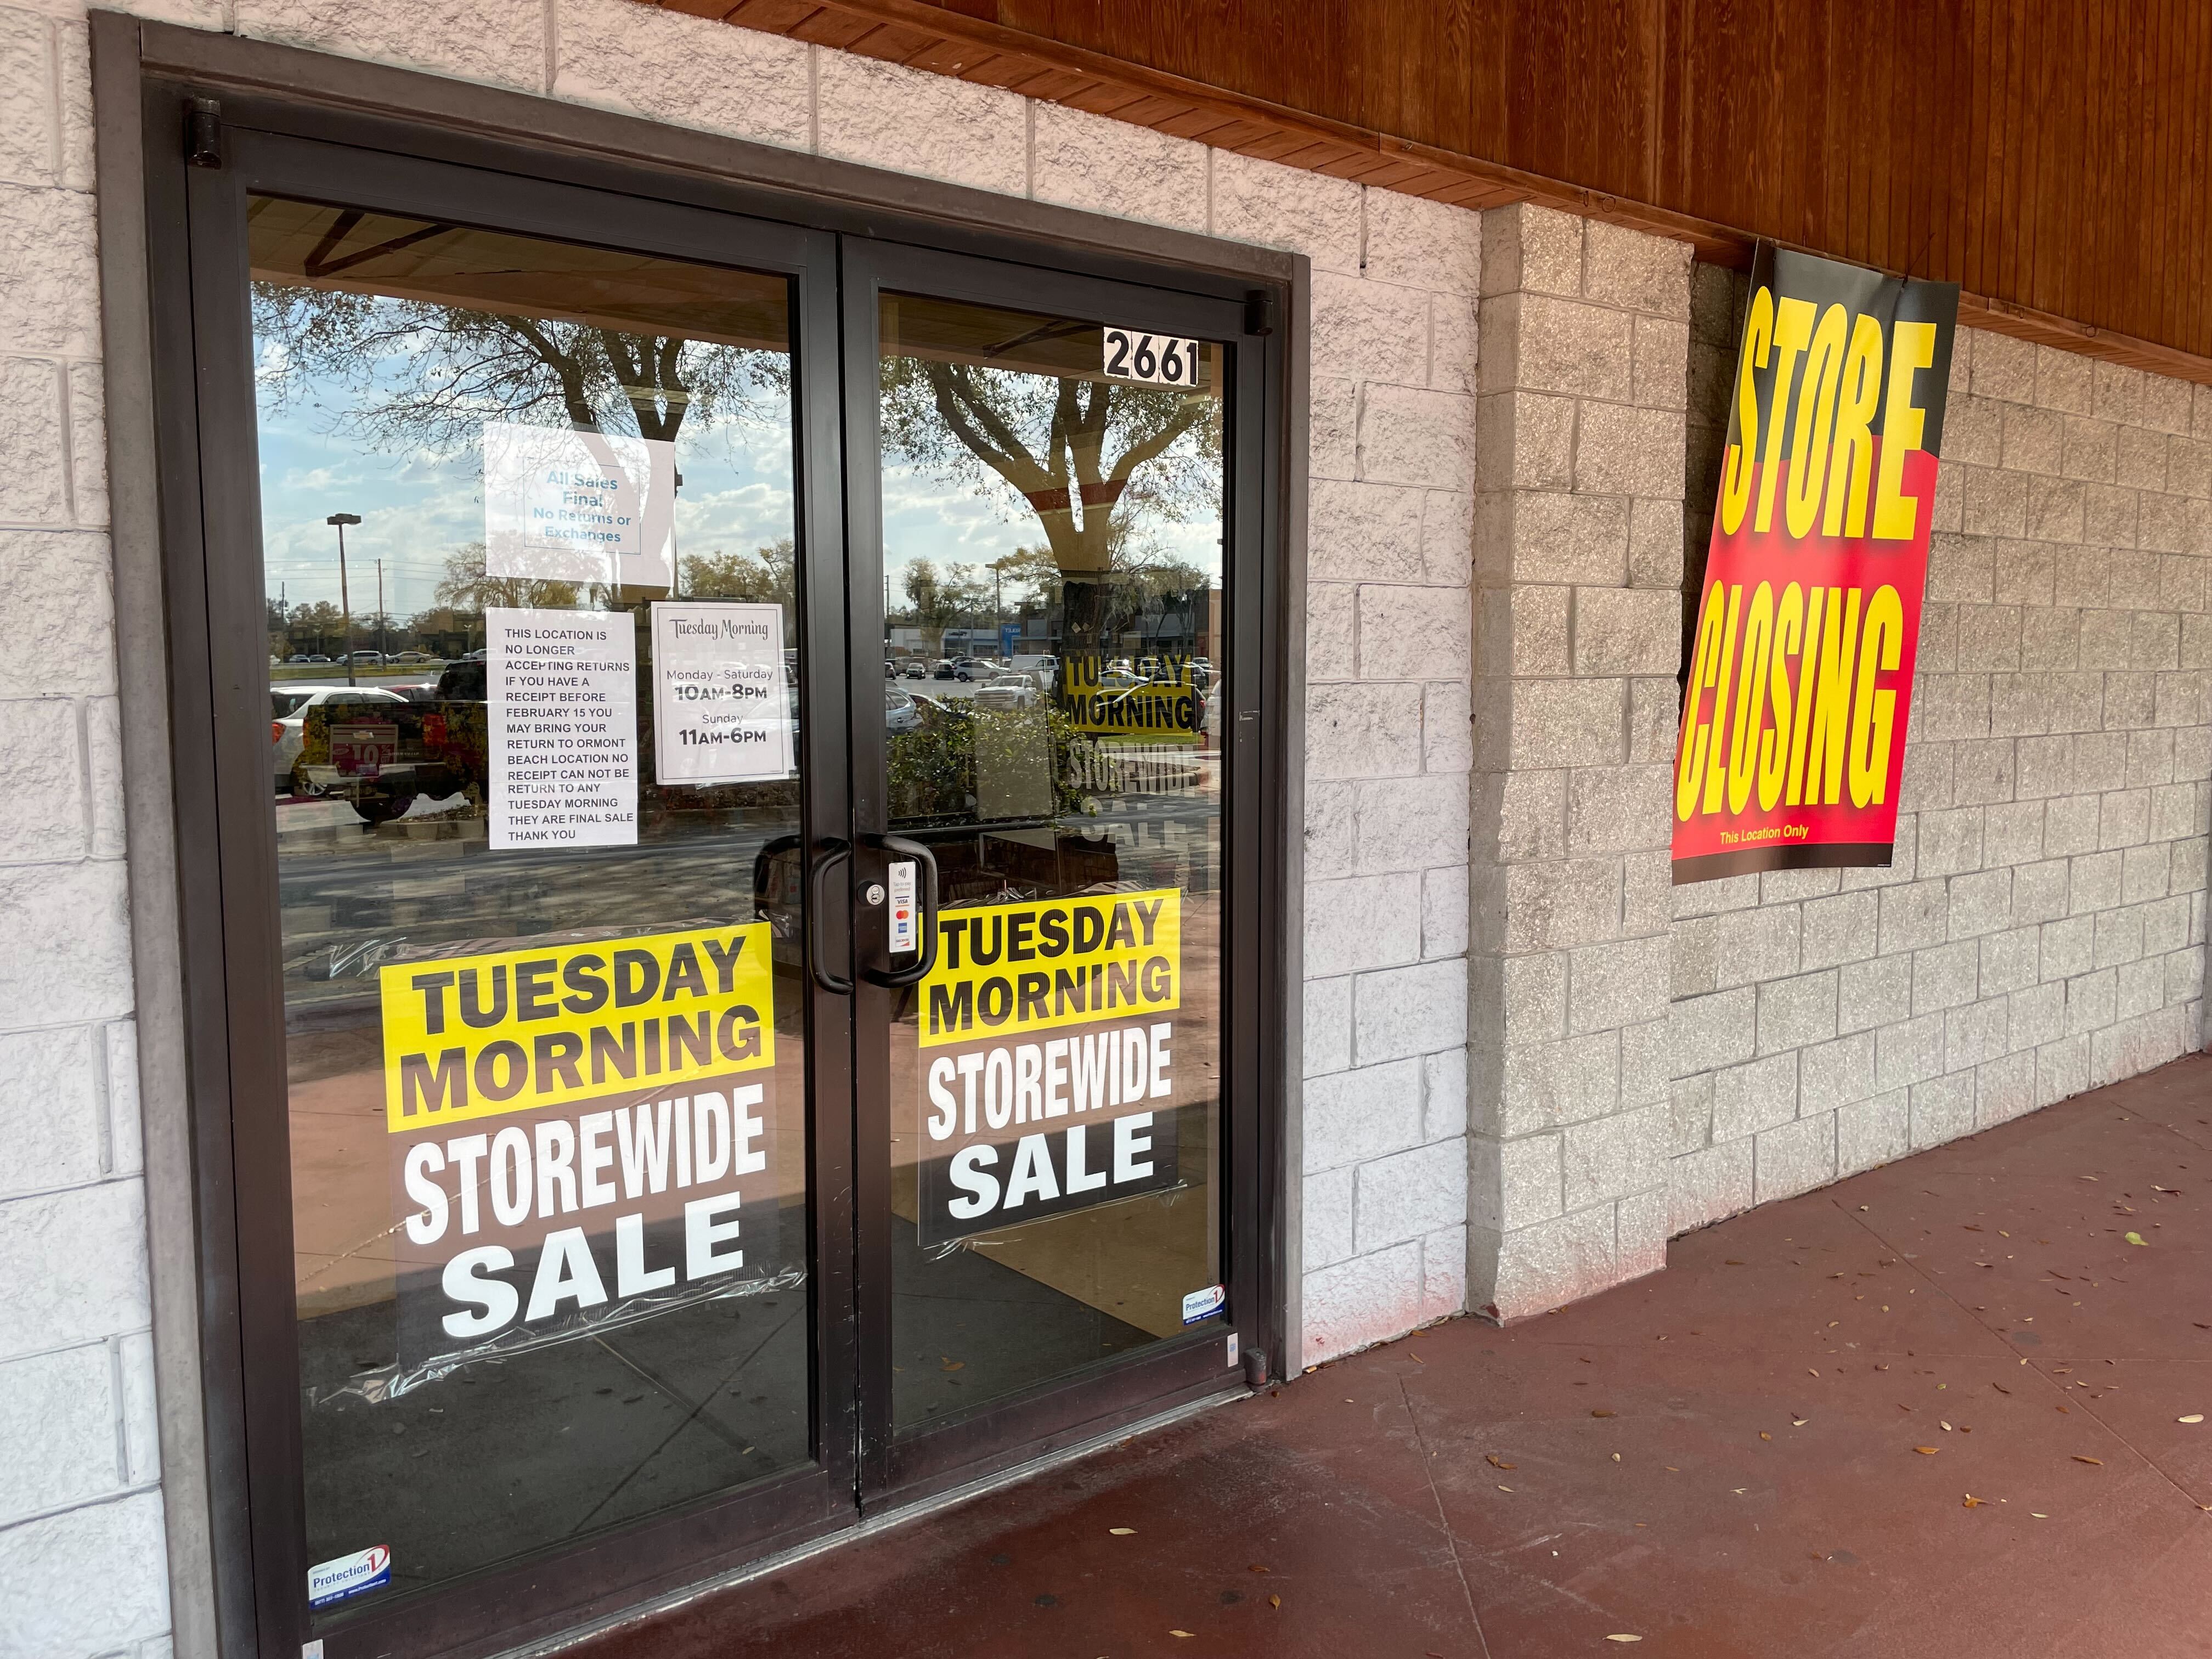 Tuesday Morning' closing: All 7 Tennessee retail stores impacted